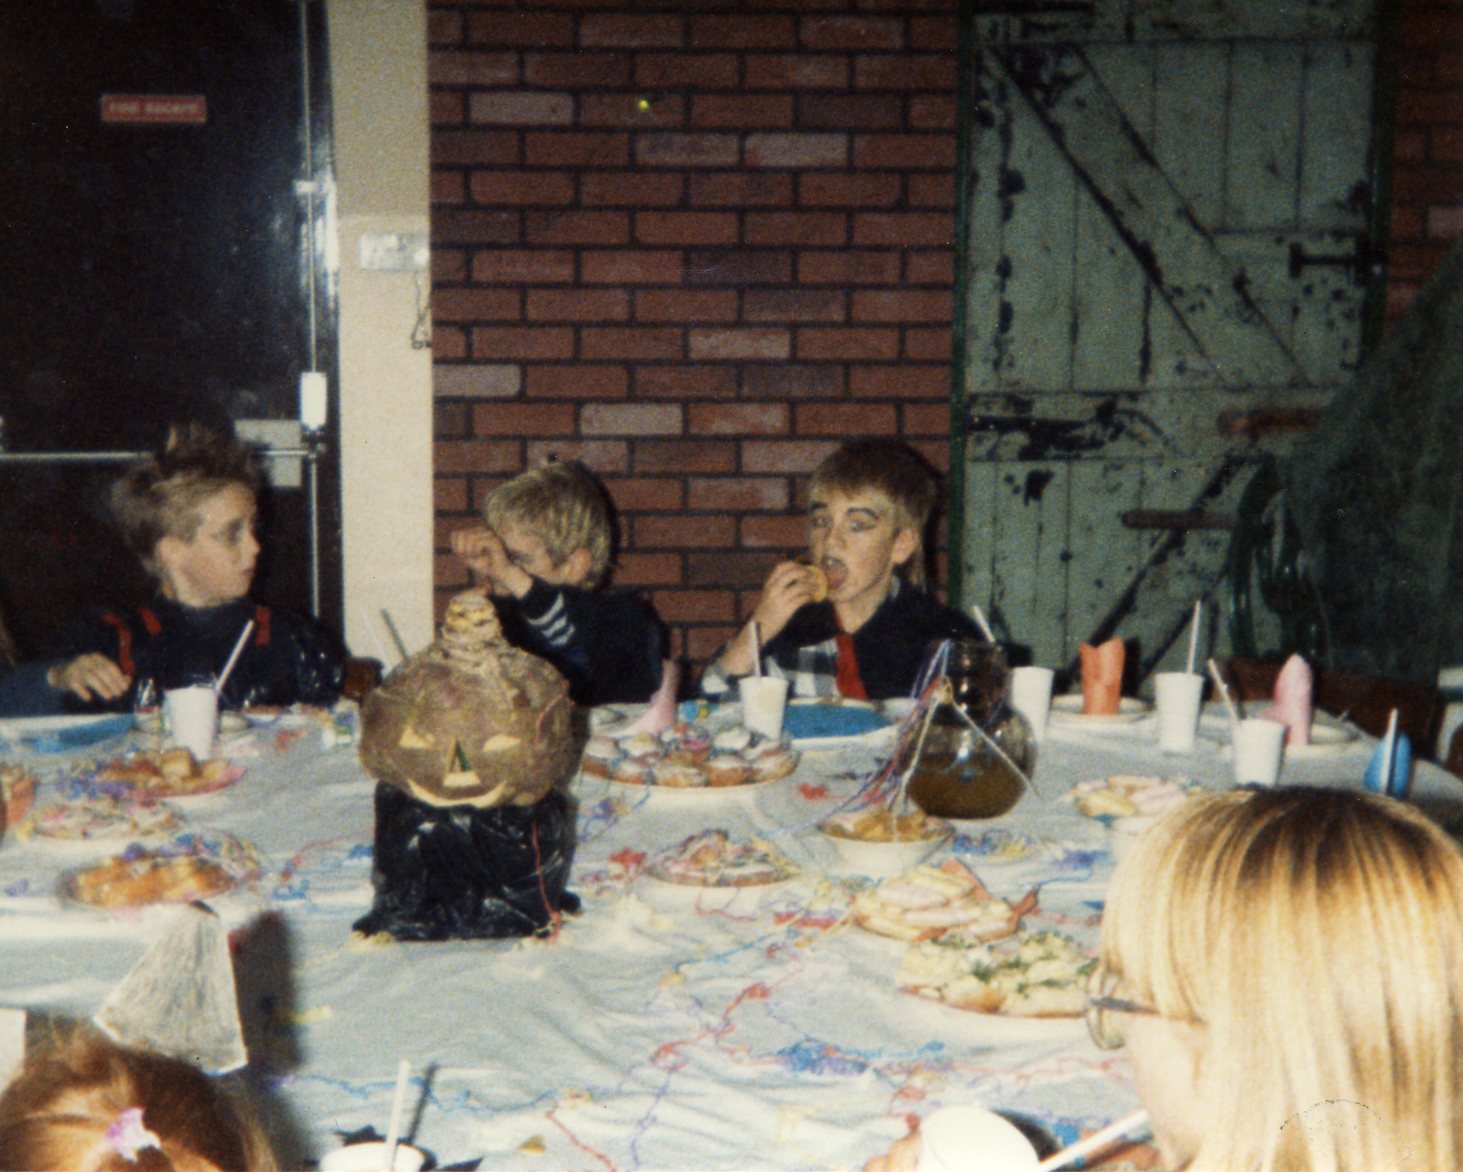 Children at a Halloween party in South Shields mid 1980s